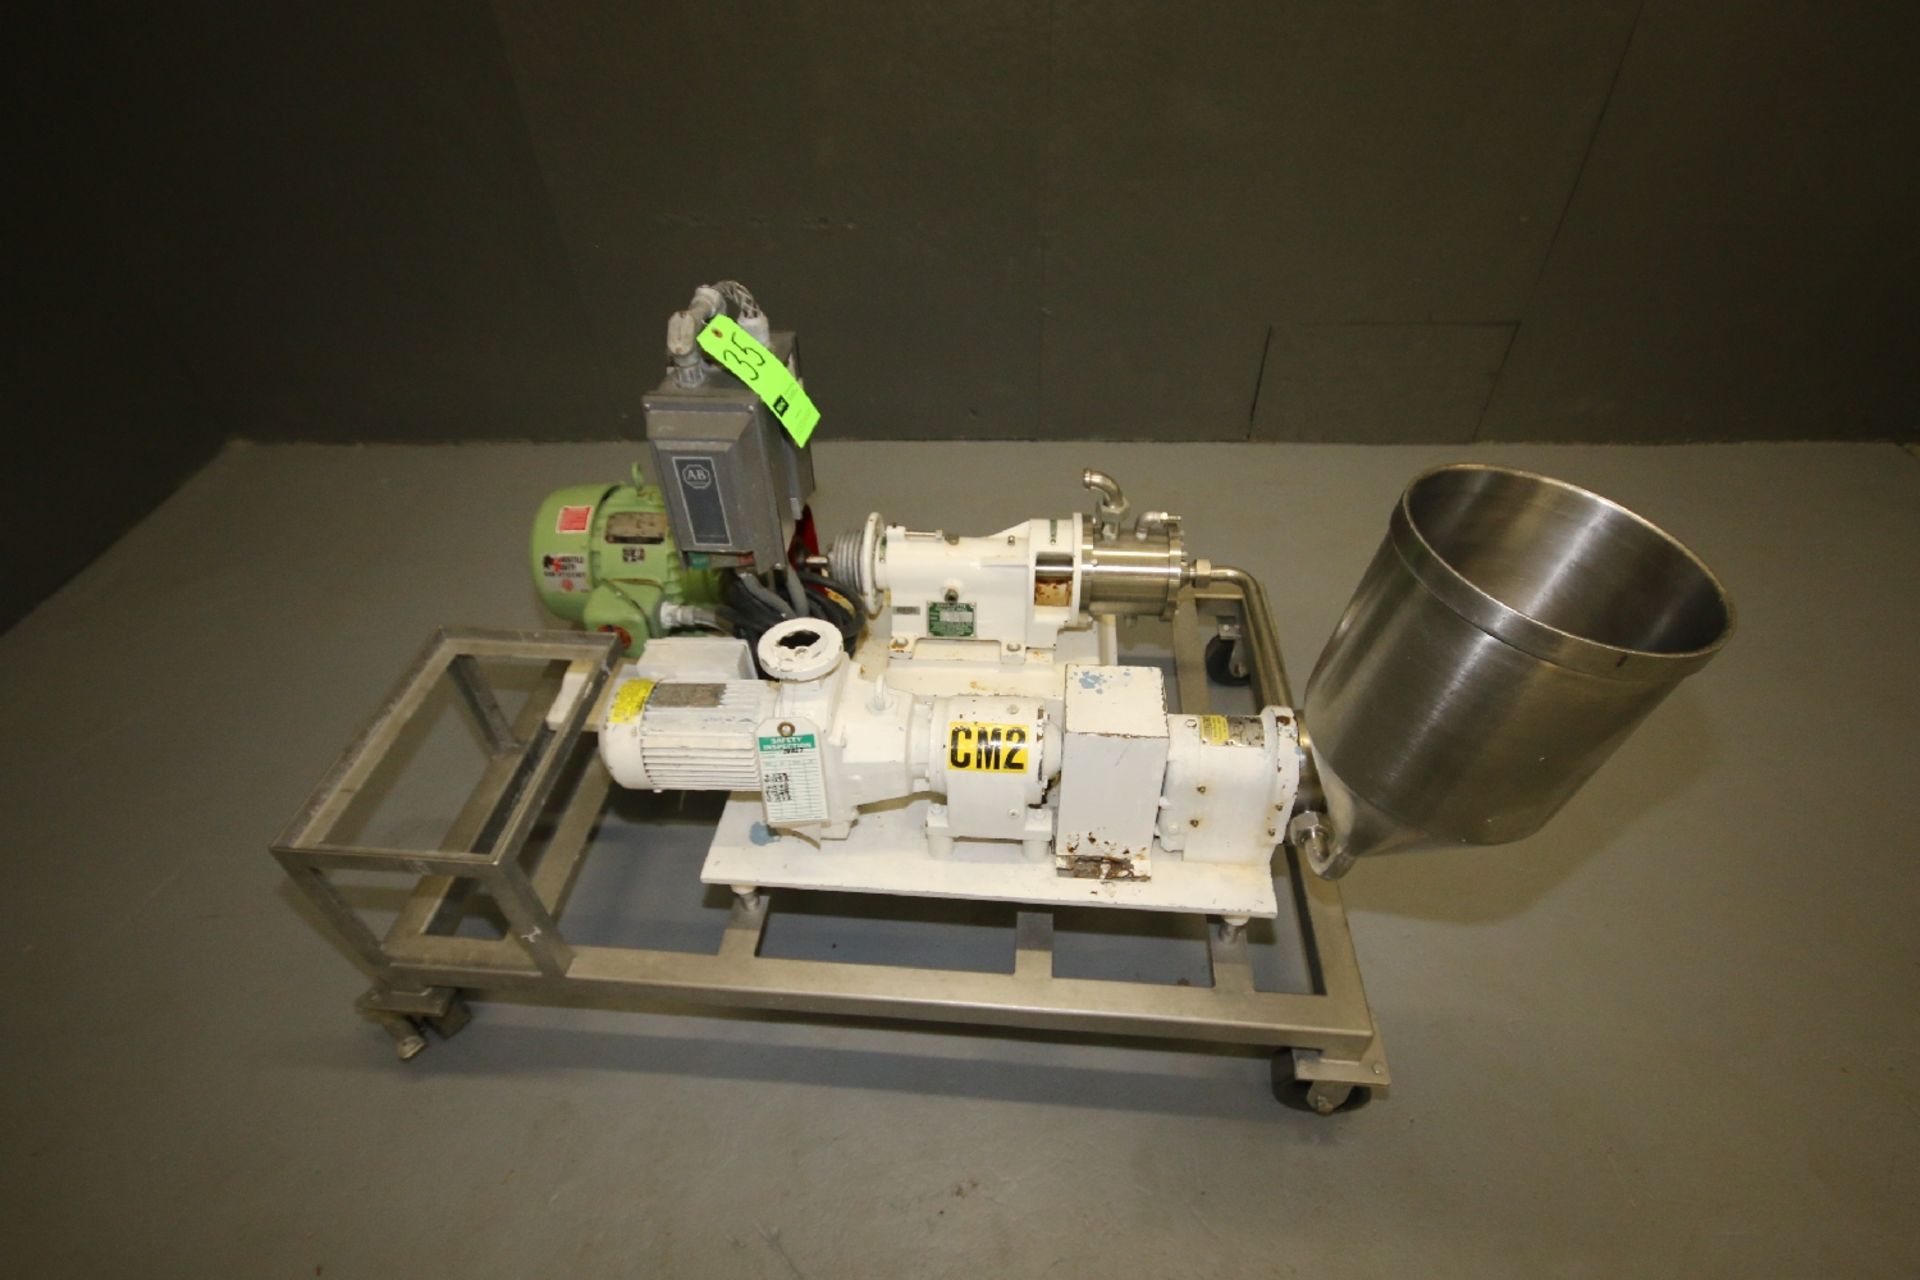 Charlotte S/S Colloid Mill, Model SD2, S/N 3348 with 3 hp Motor and Waukesha Positive Displacement - Image 2 of 7